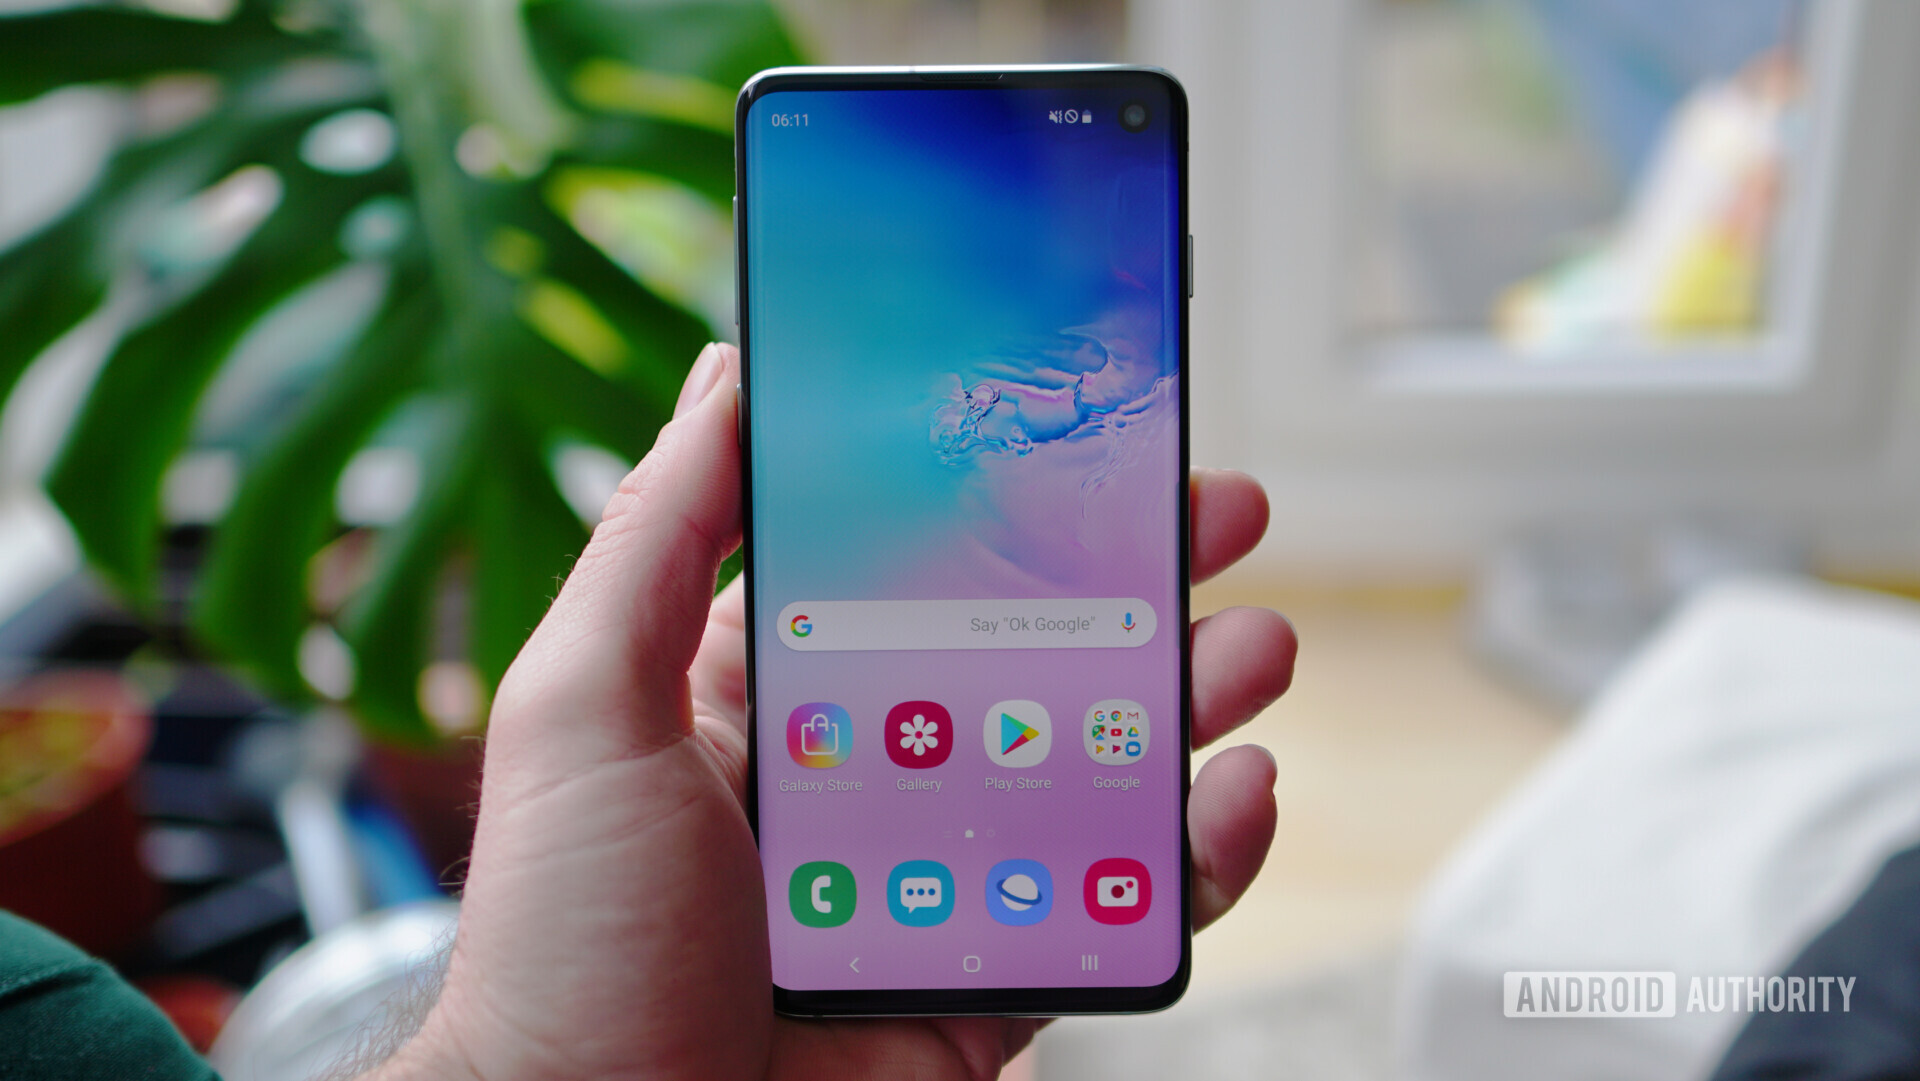 The Samsung Galaxy S10 One UI 2.0 beta suffers from a major flaw.